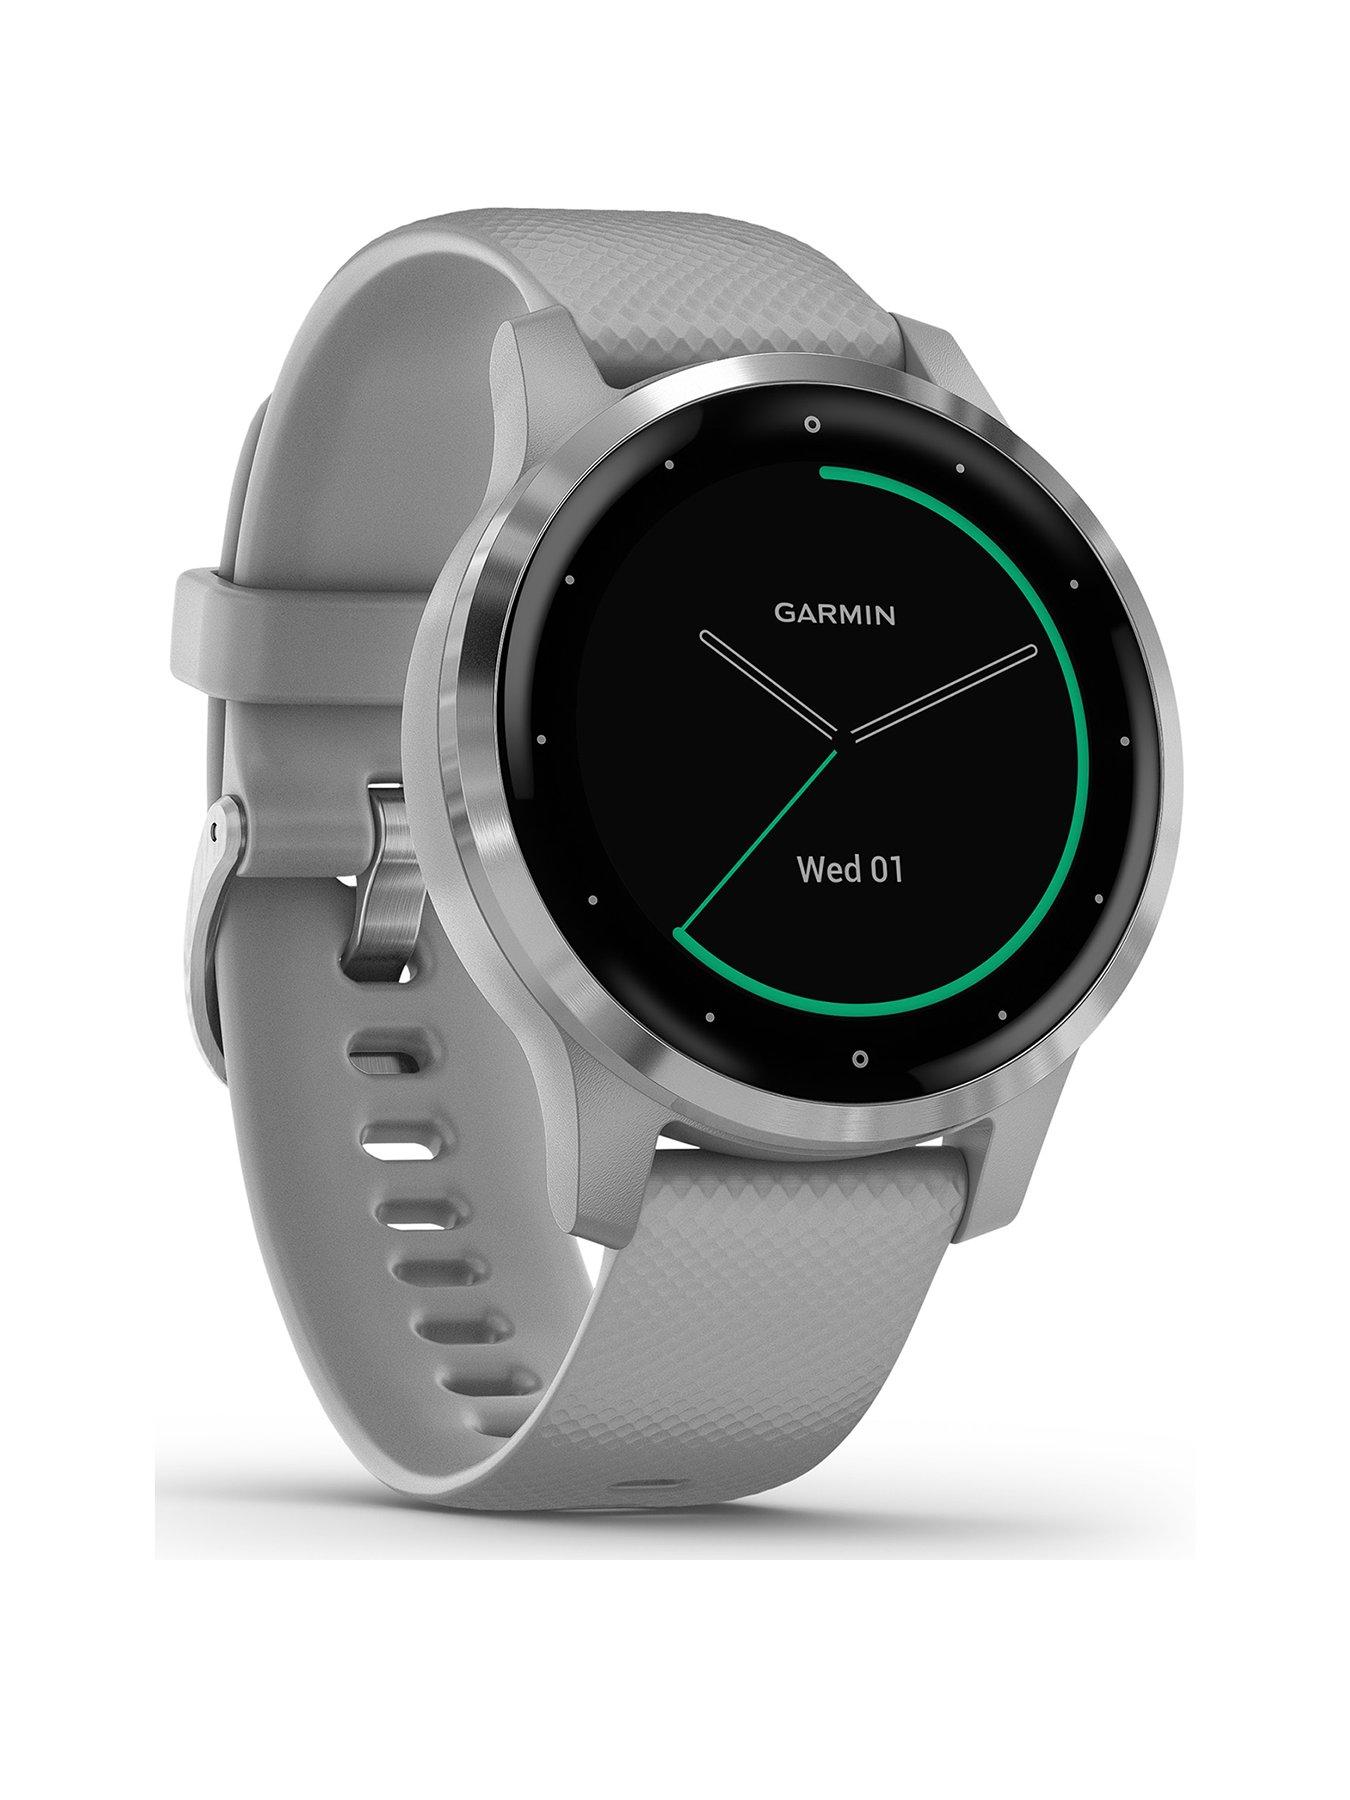 Garmin Vivoactive 4, GPS Smartwatch, Features Music, Body Energy  Monitoring, Animated Workouts, Pulse Ox Sensors and More, Black